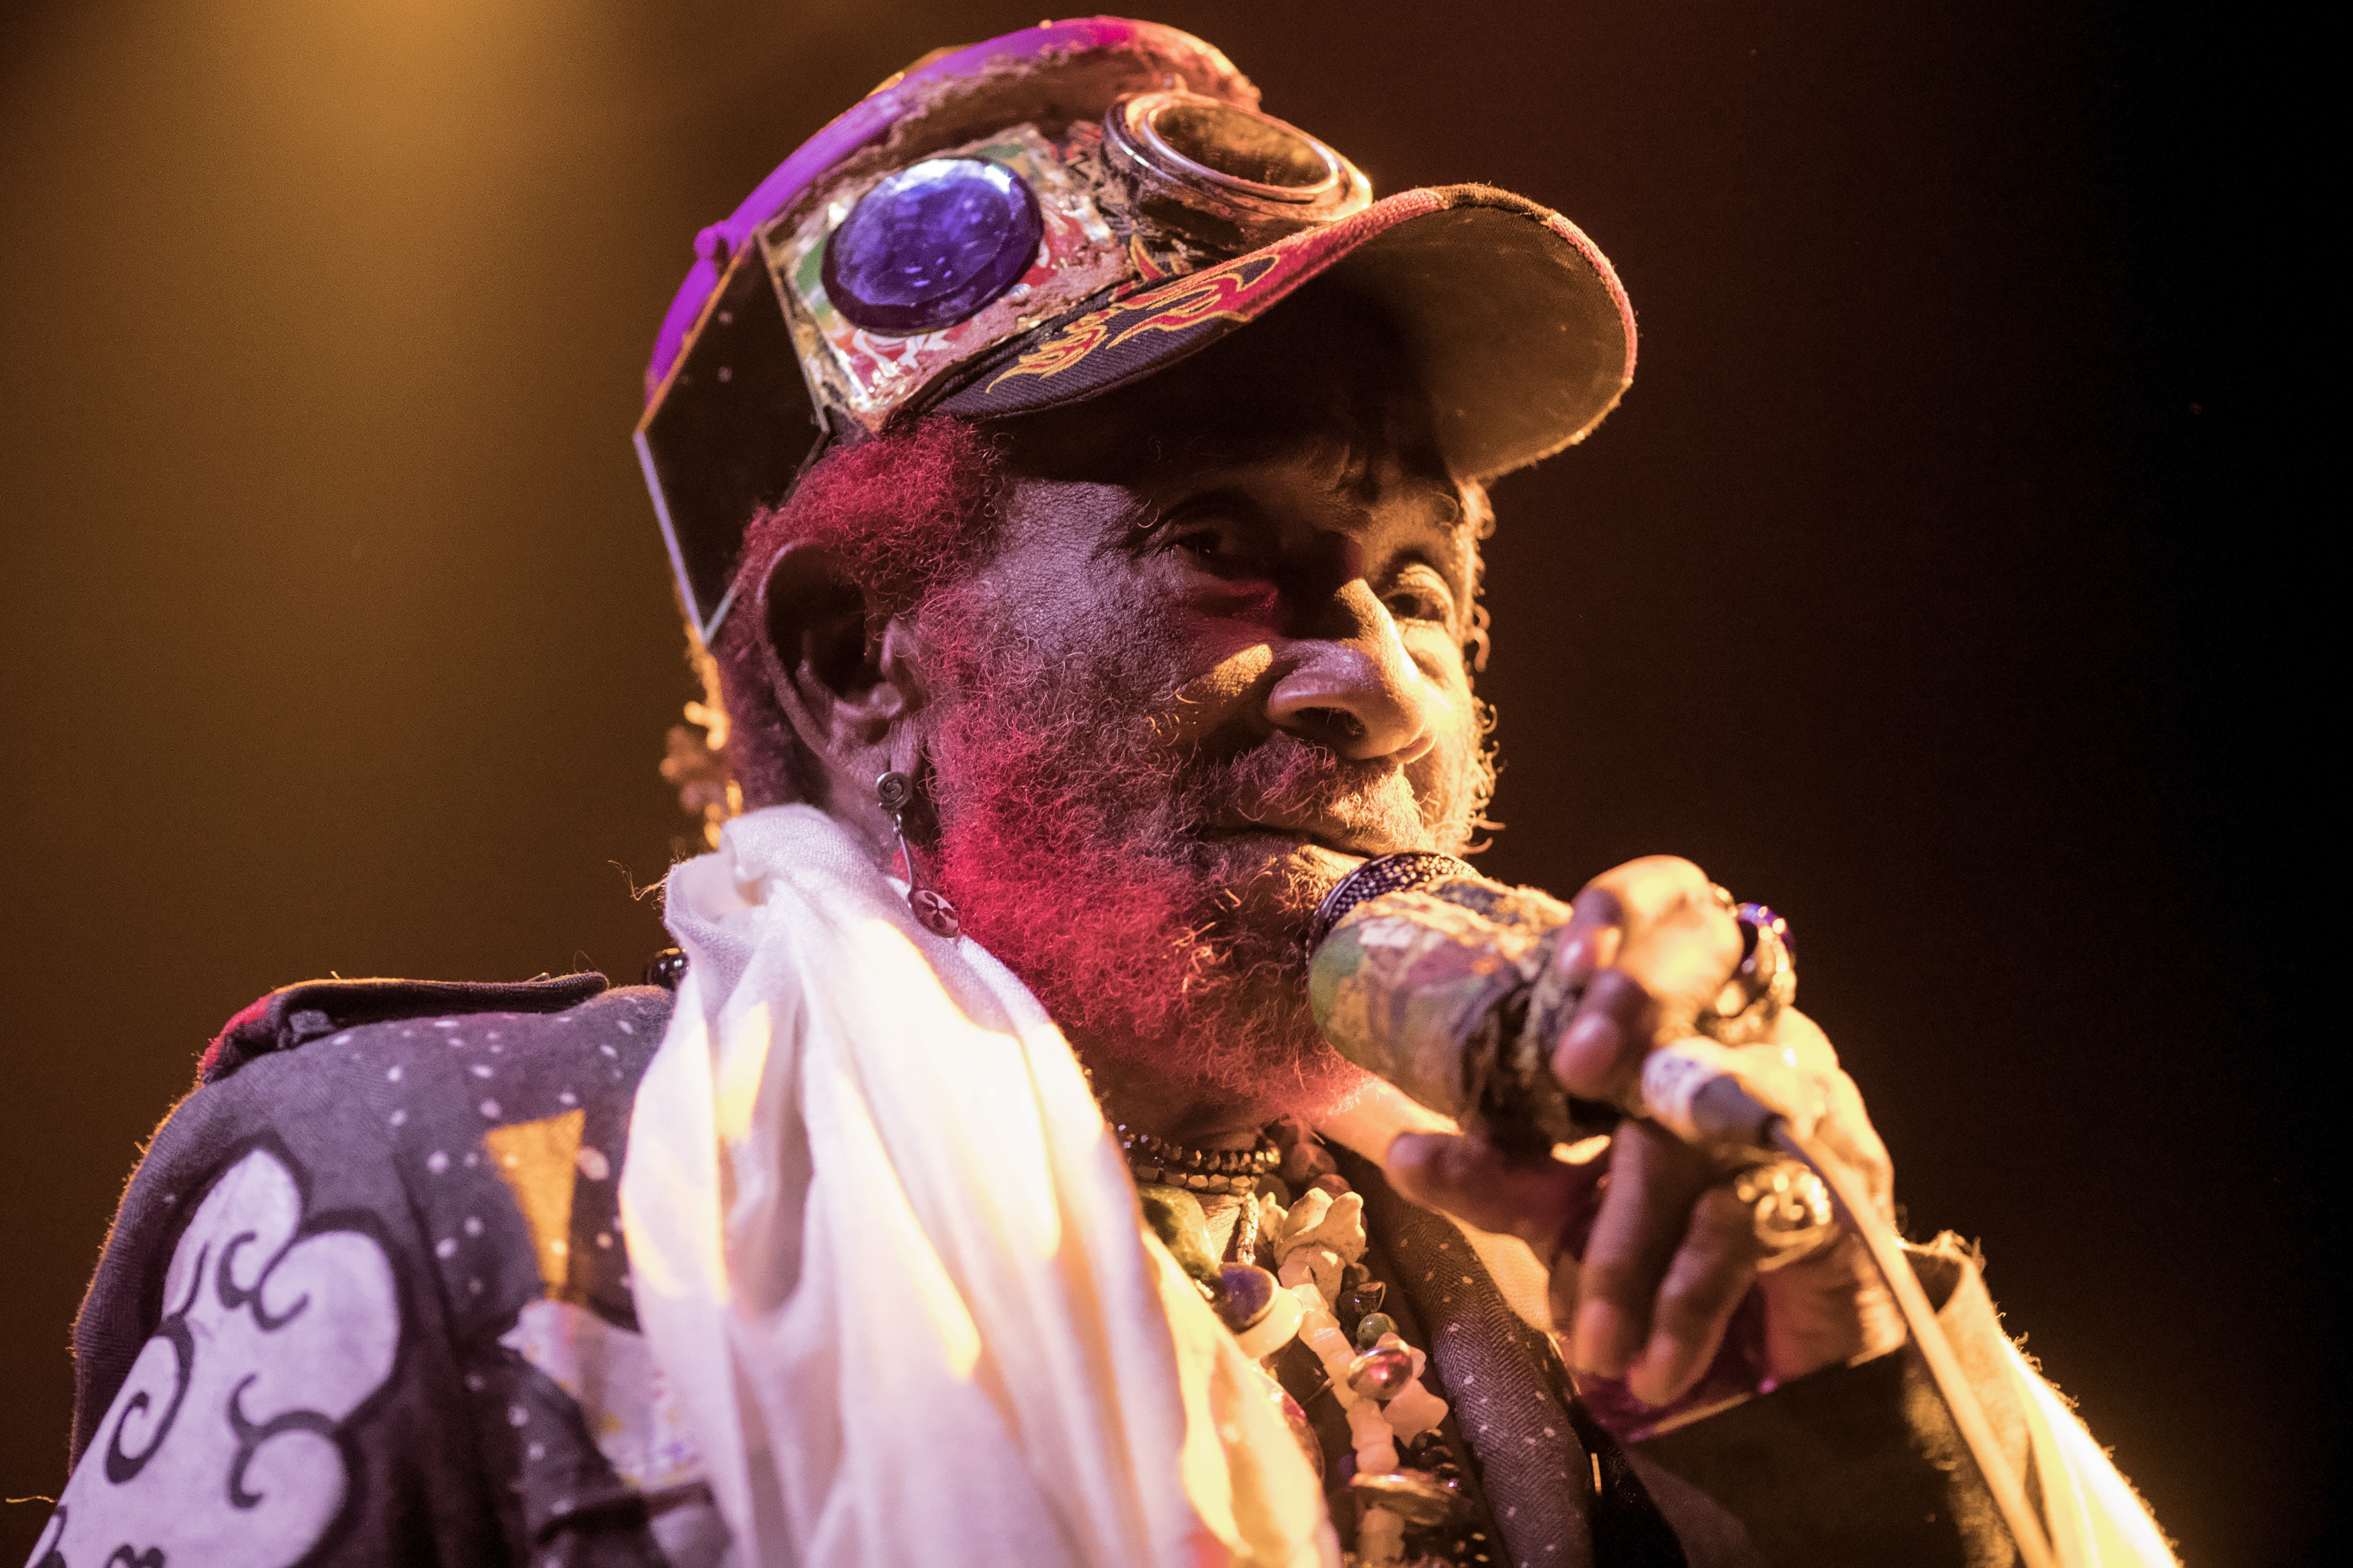  Lee “Scratch” Perry added to already stellar Positive Vibration Festival of Reggae lineup